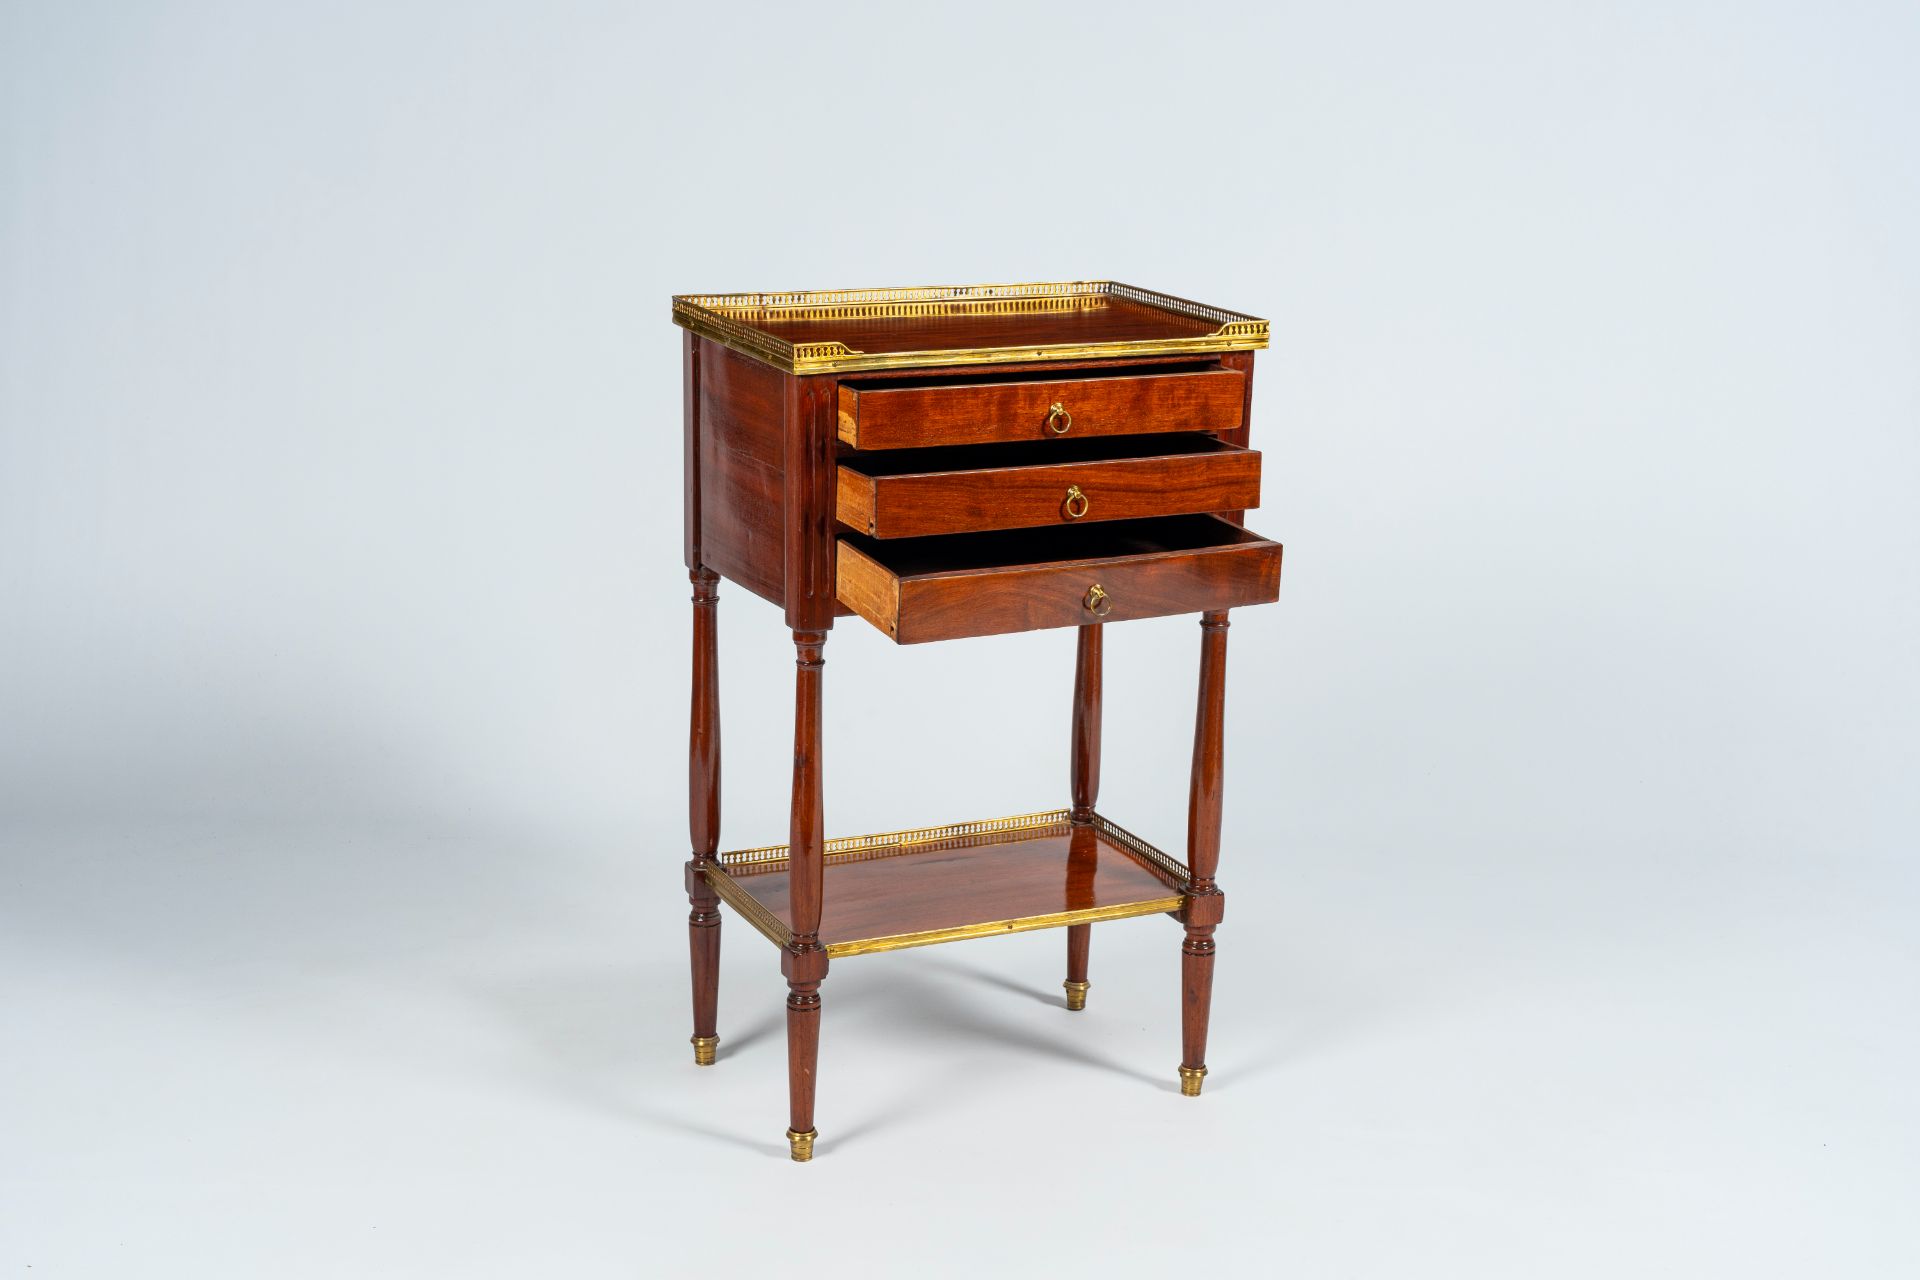 A French mahogany gilt brass mounted side table with three drawers, late 19th C.